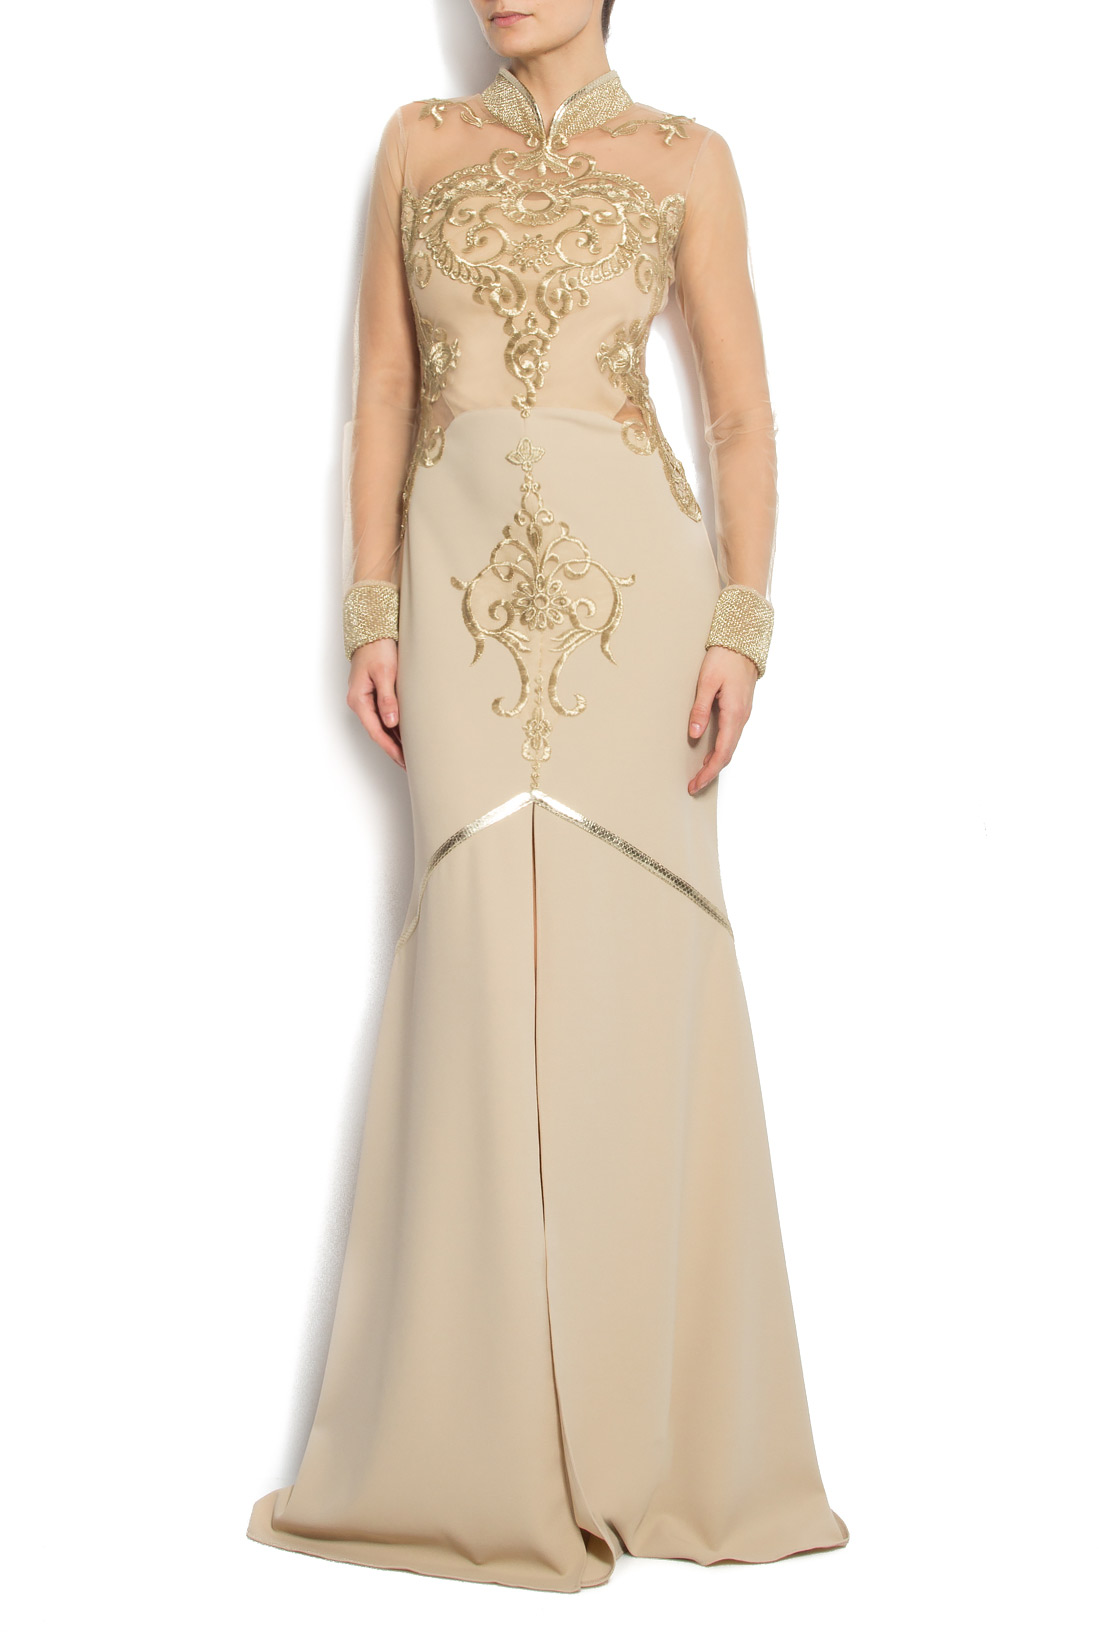 Hand embroidered crepe gown Anca si Silvia Negulescu image 0